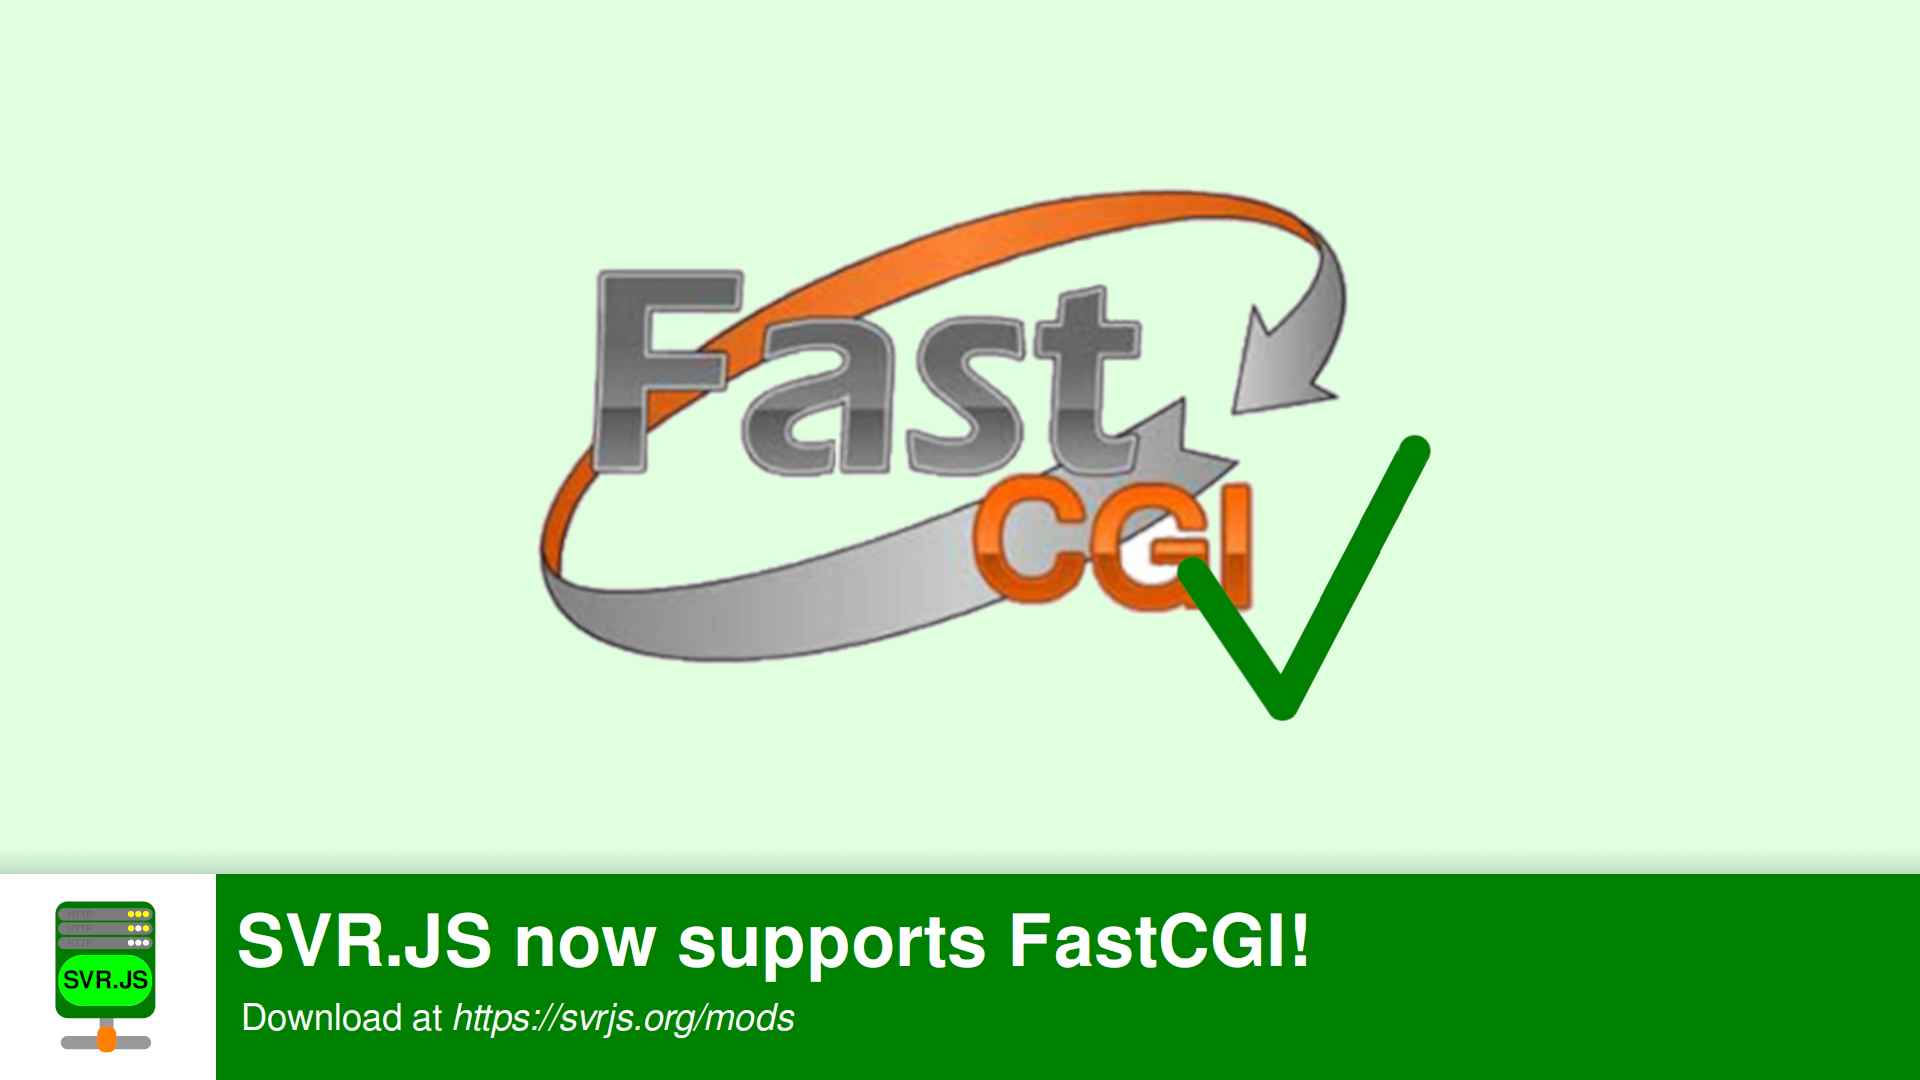 SVR.JS now supports FastCGI!